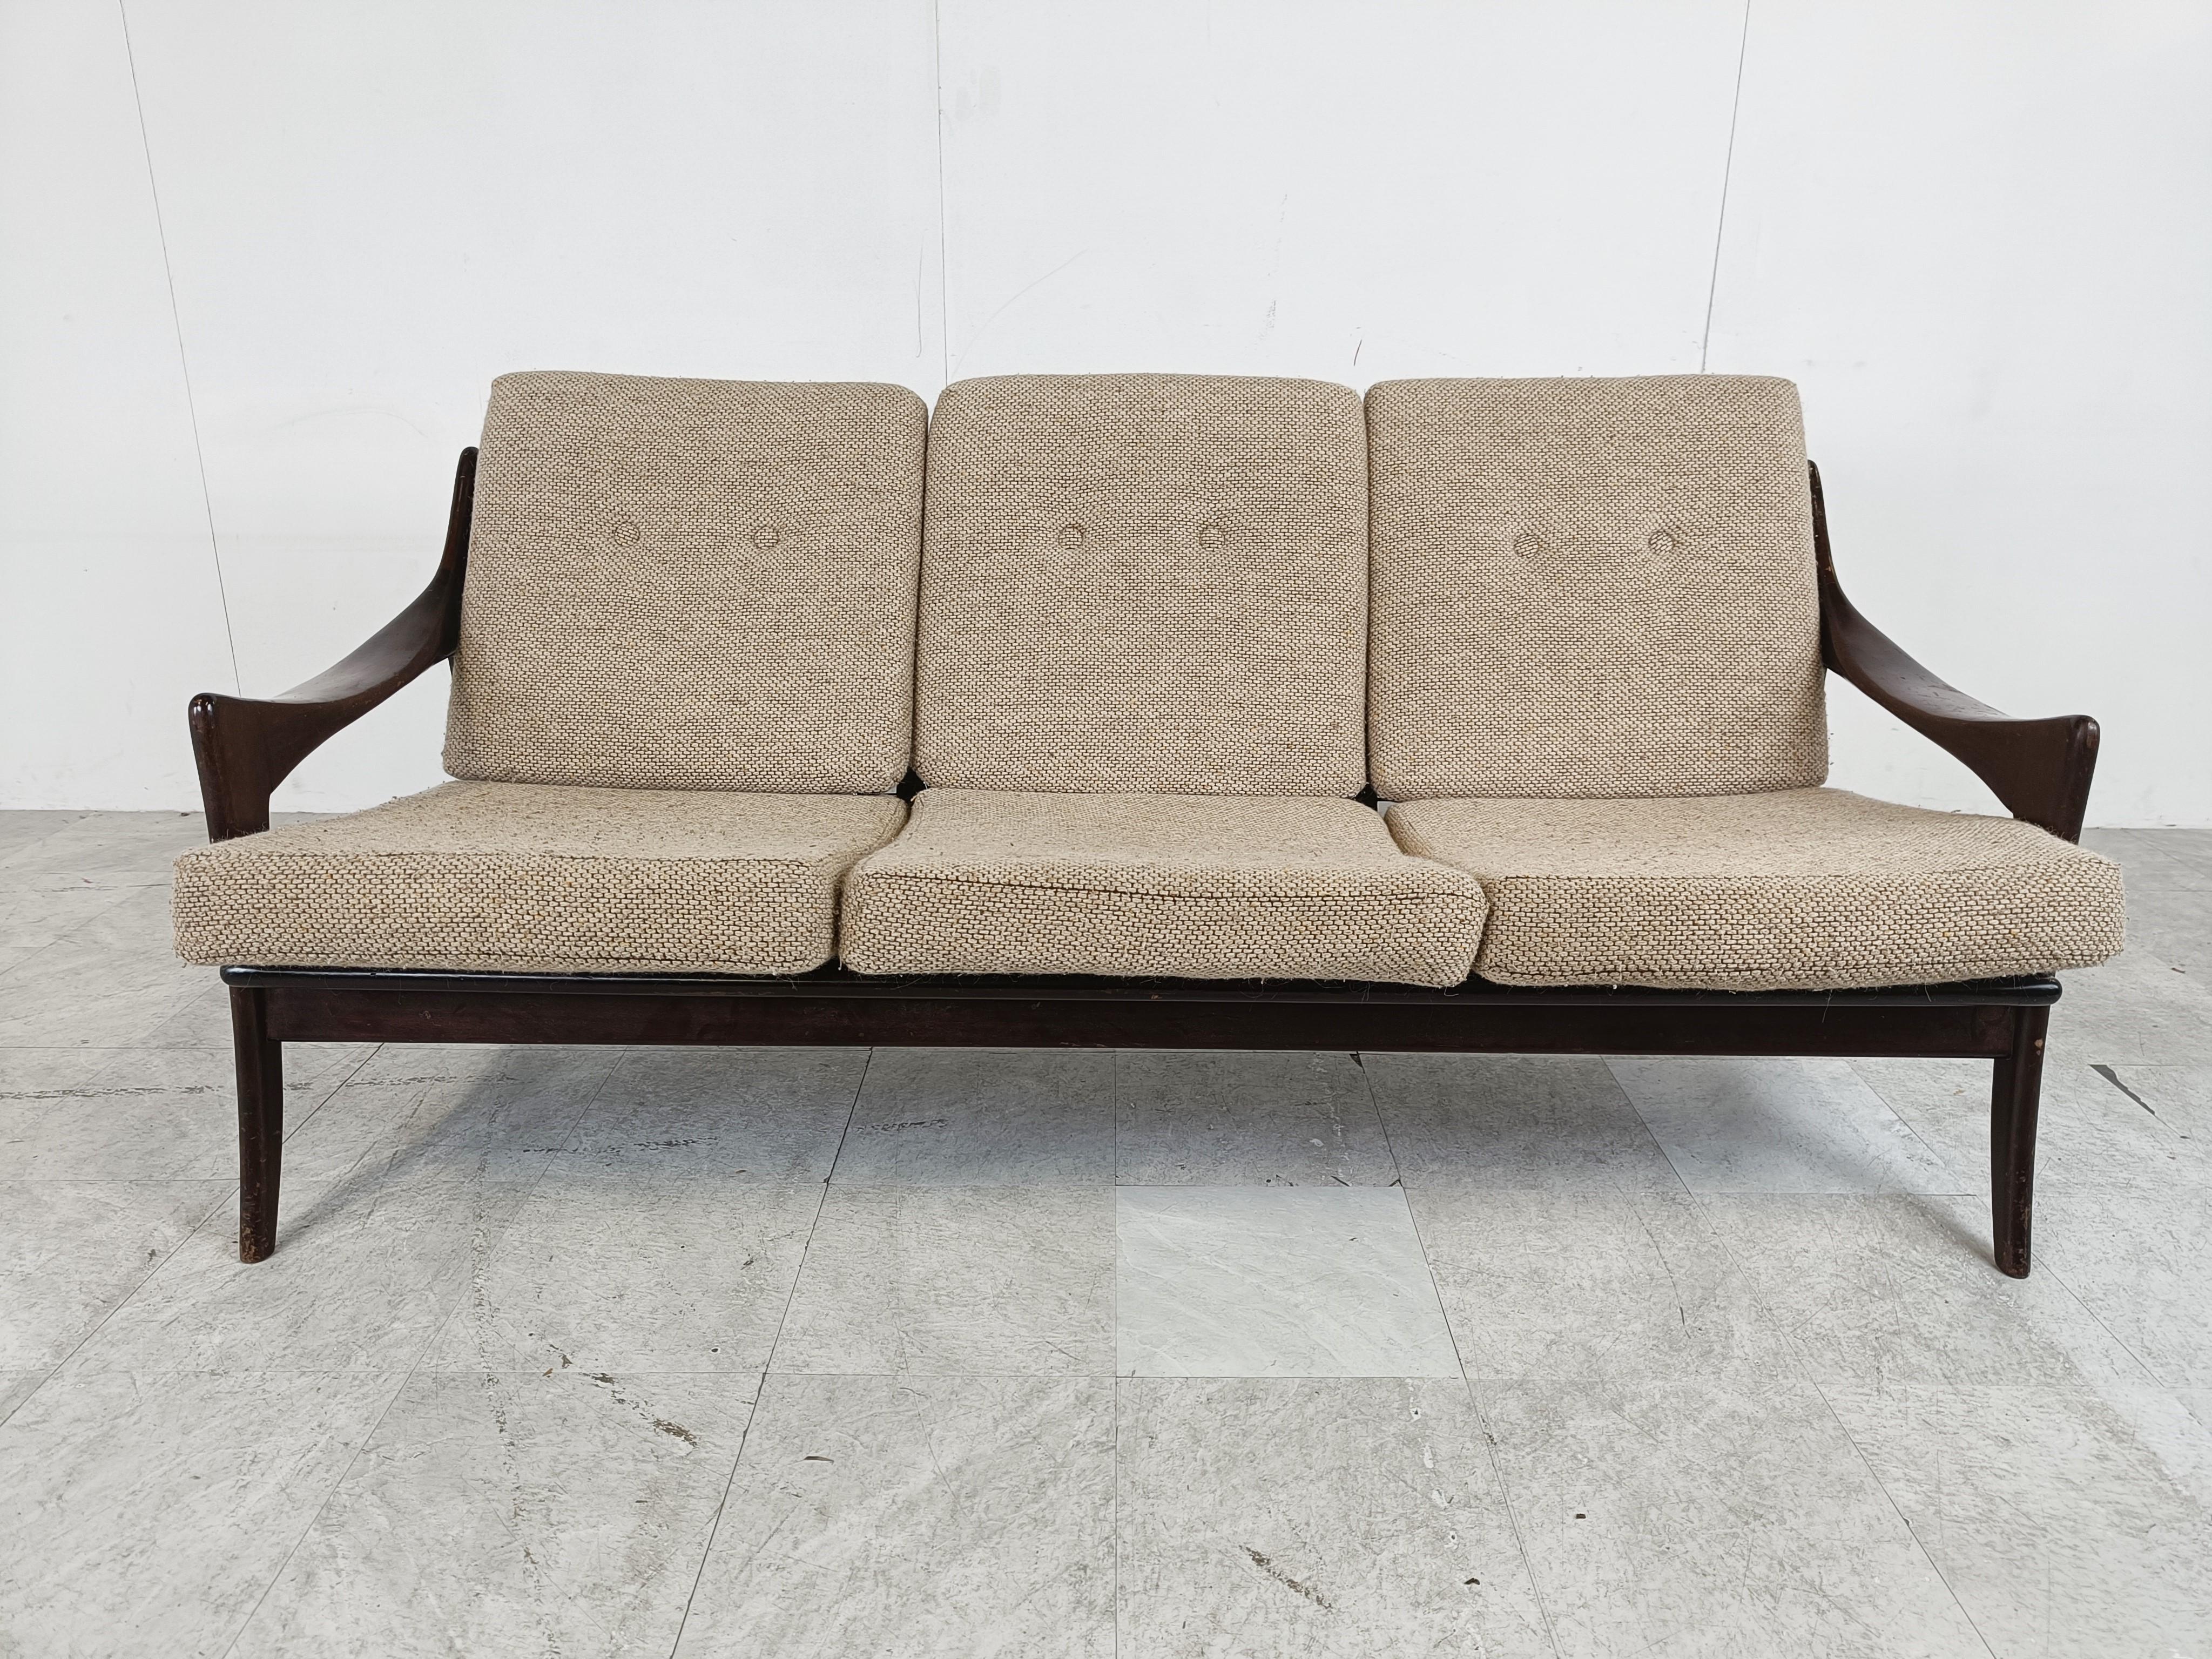 Beautiful midcentury three seater sofa with a nicely organic designed teak wooden frame and grey fabric cushions.

Eye catching dutch design.

The frame has some user traces at the back and on the armrests but the design still makes it stand